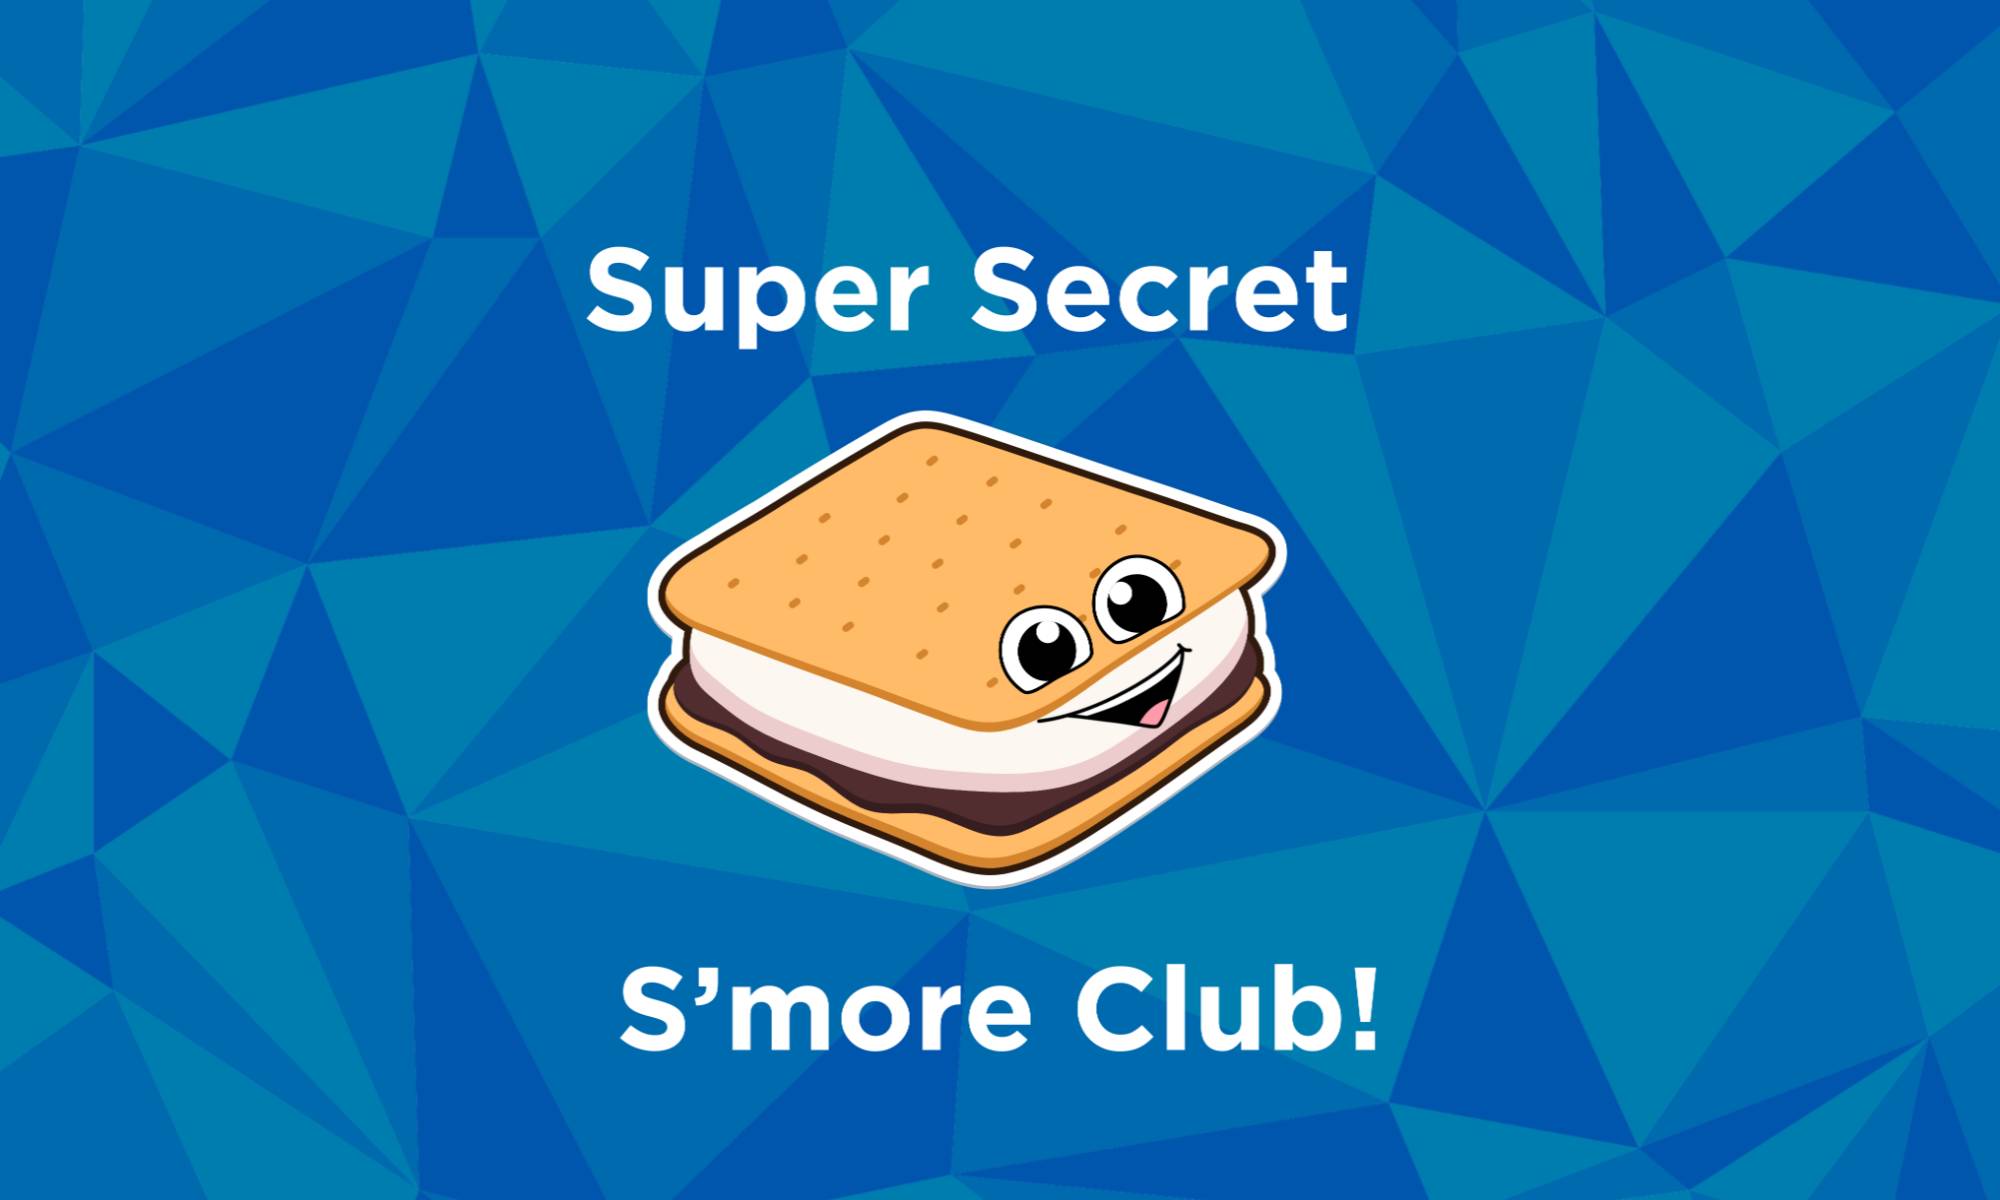 A s'more icon with text that reads "Super Secret S'more Club"